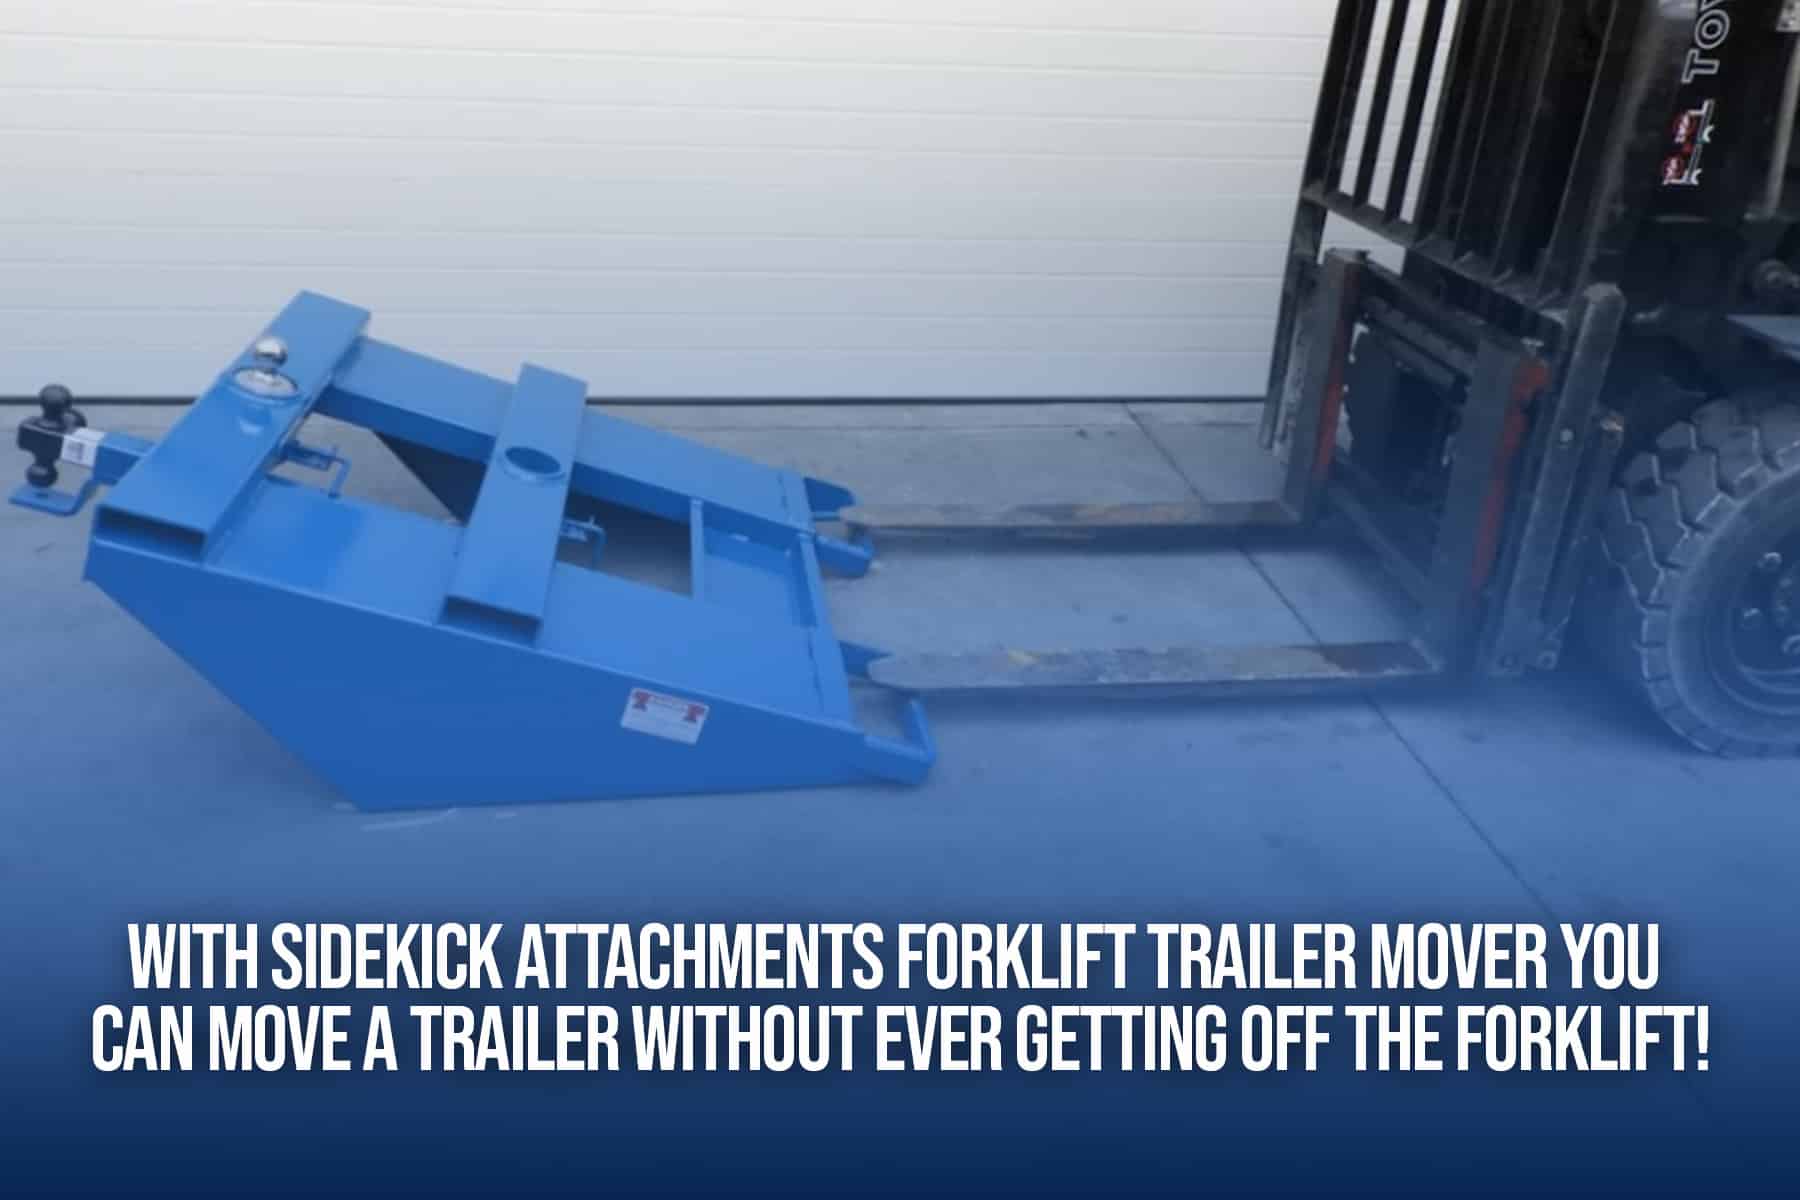 sidekick attachments forklift trailer movers allow you to move trailers without getting off of the forklift